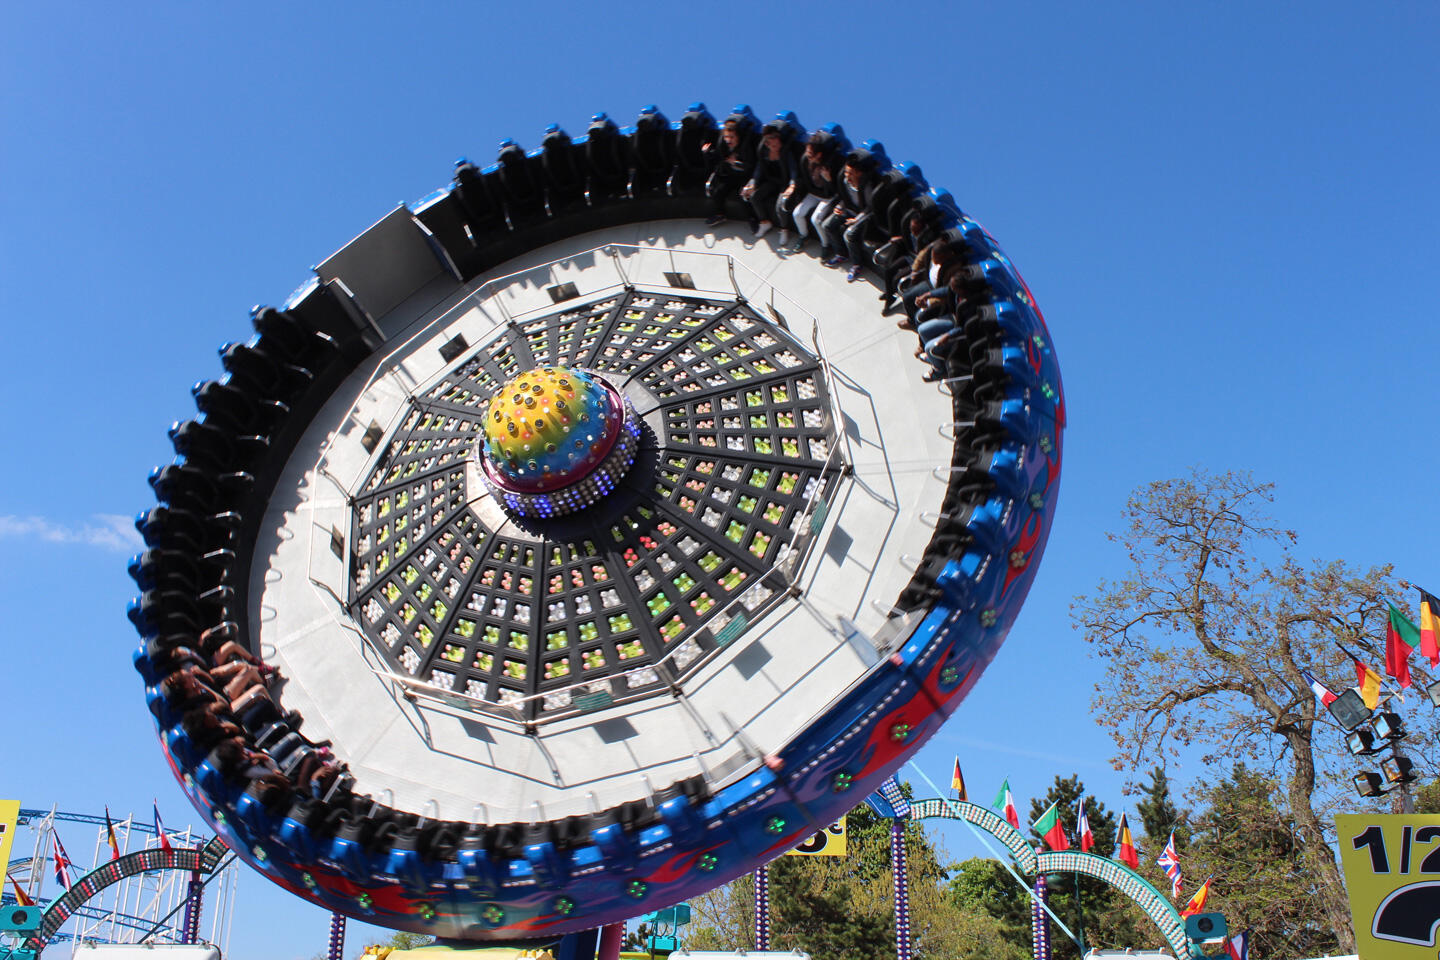 Spinning ride at the Foire du Trône with people seated around, blue sky in the background